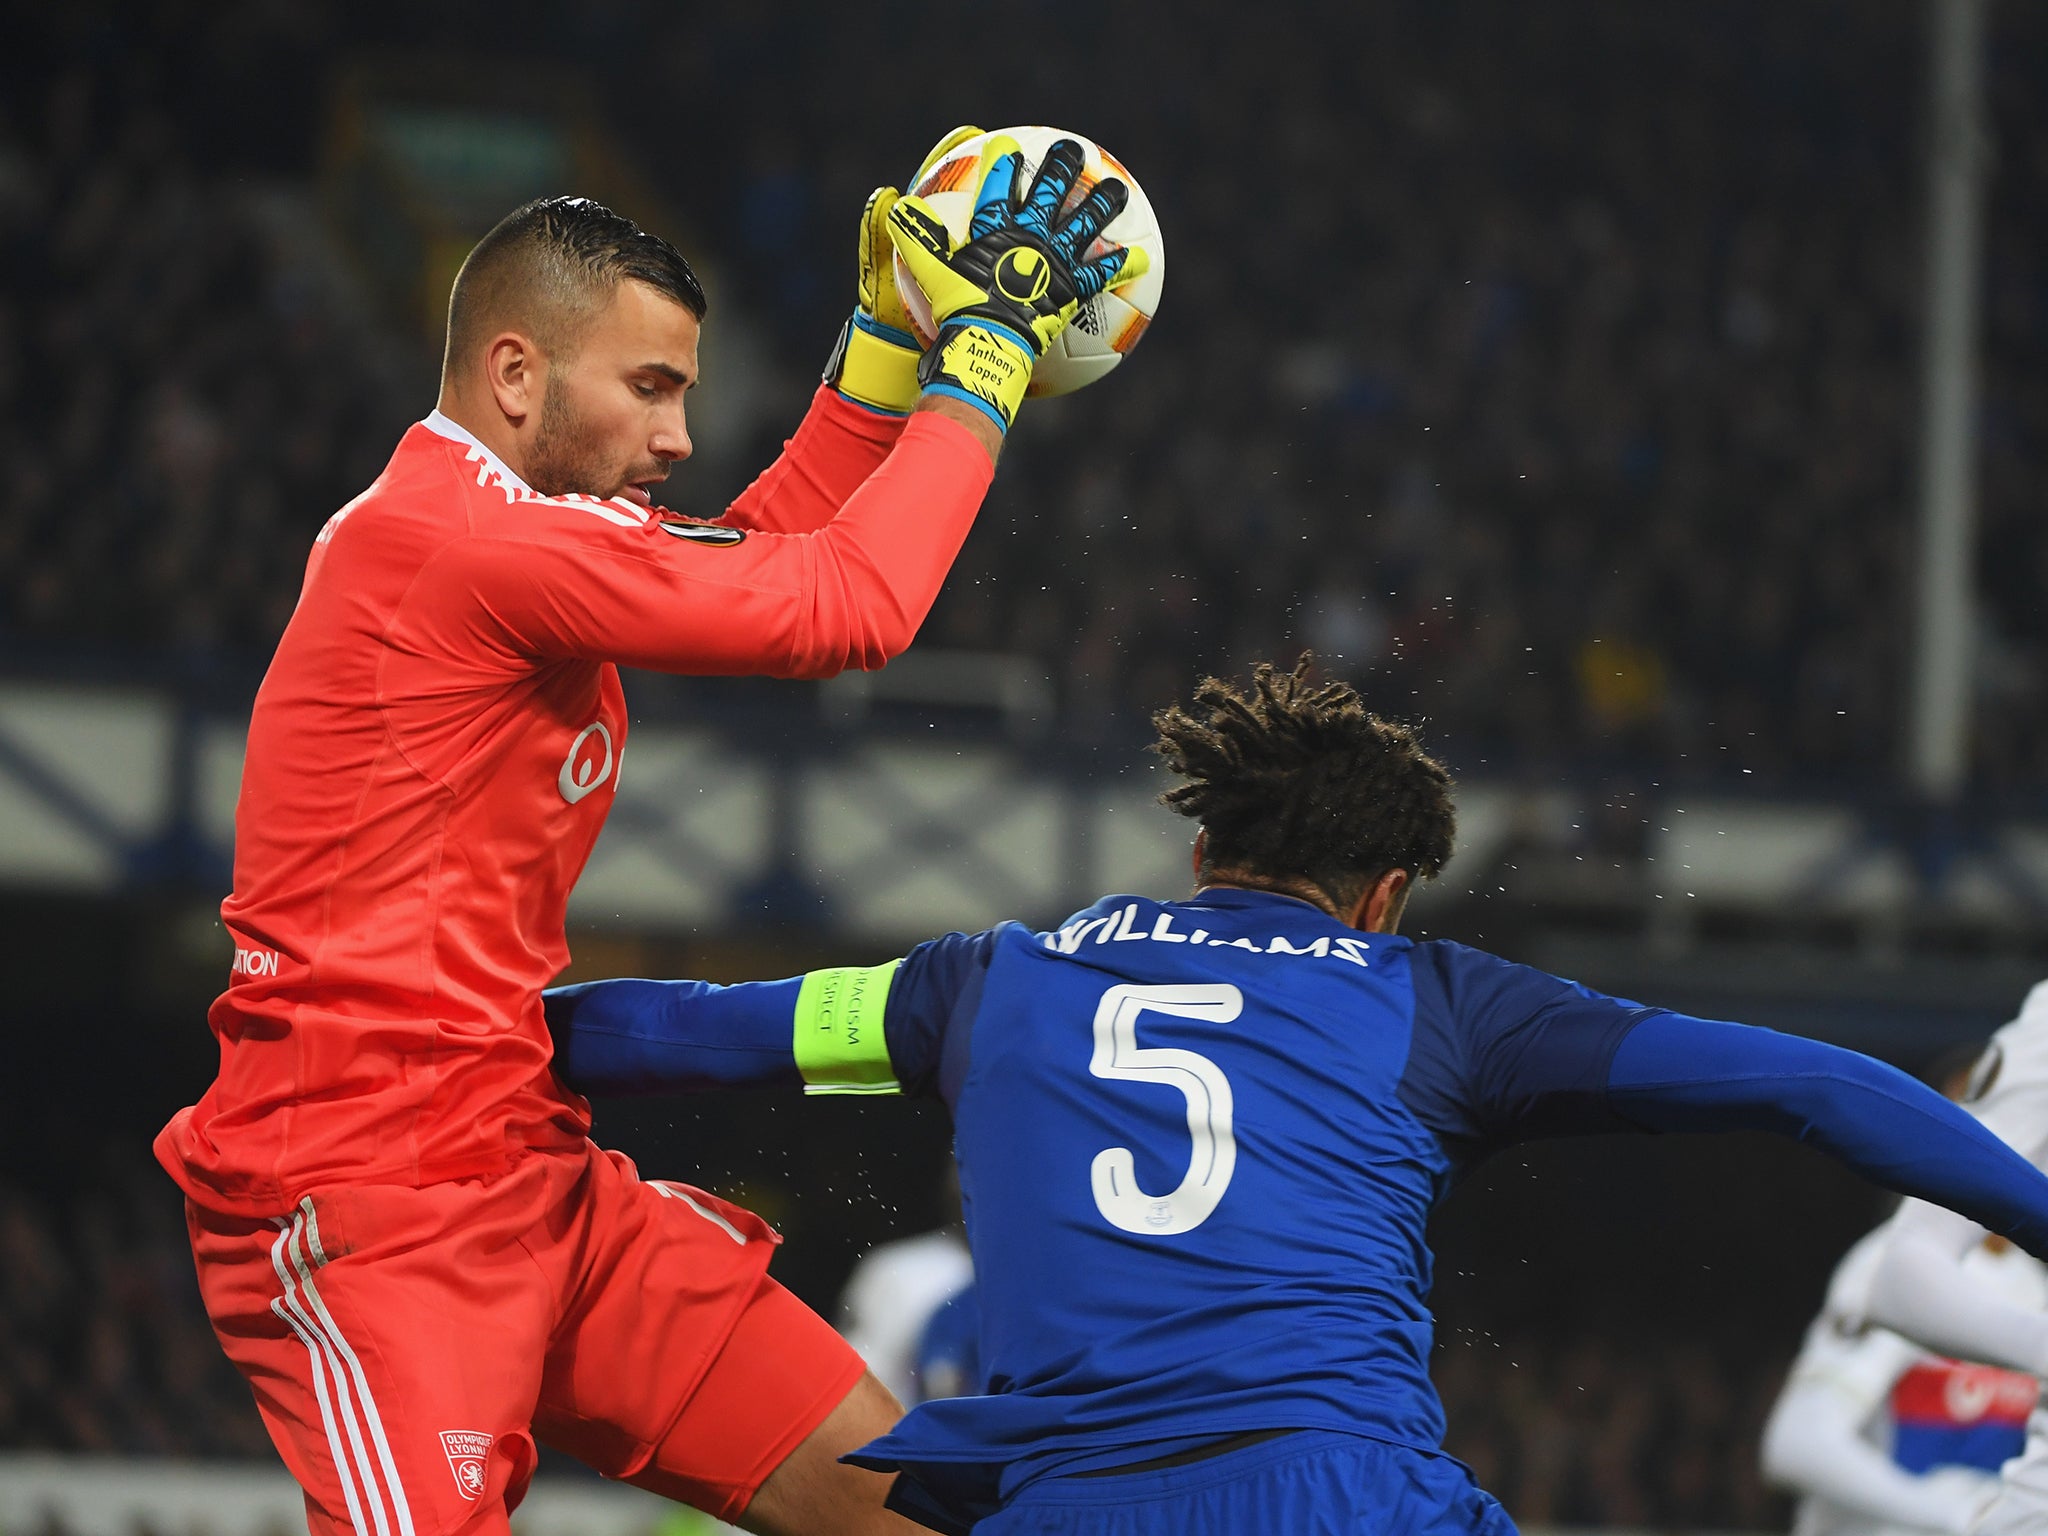 Williams triggered the skirmish by barging into Lyon goalkeeper Lopes